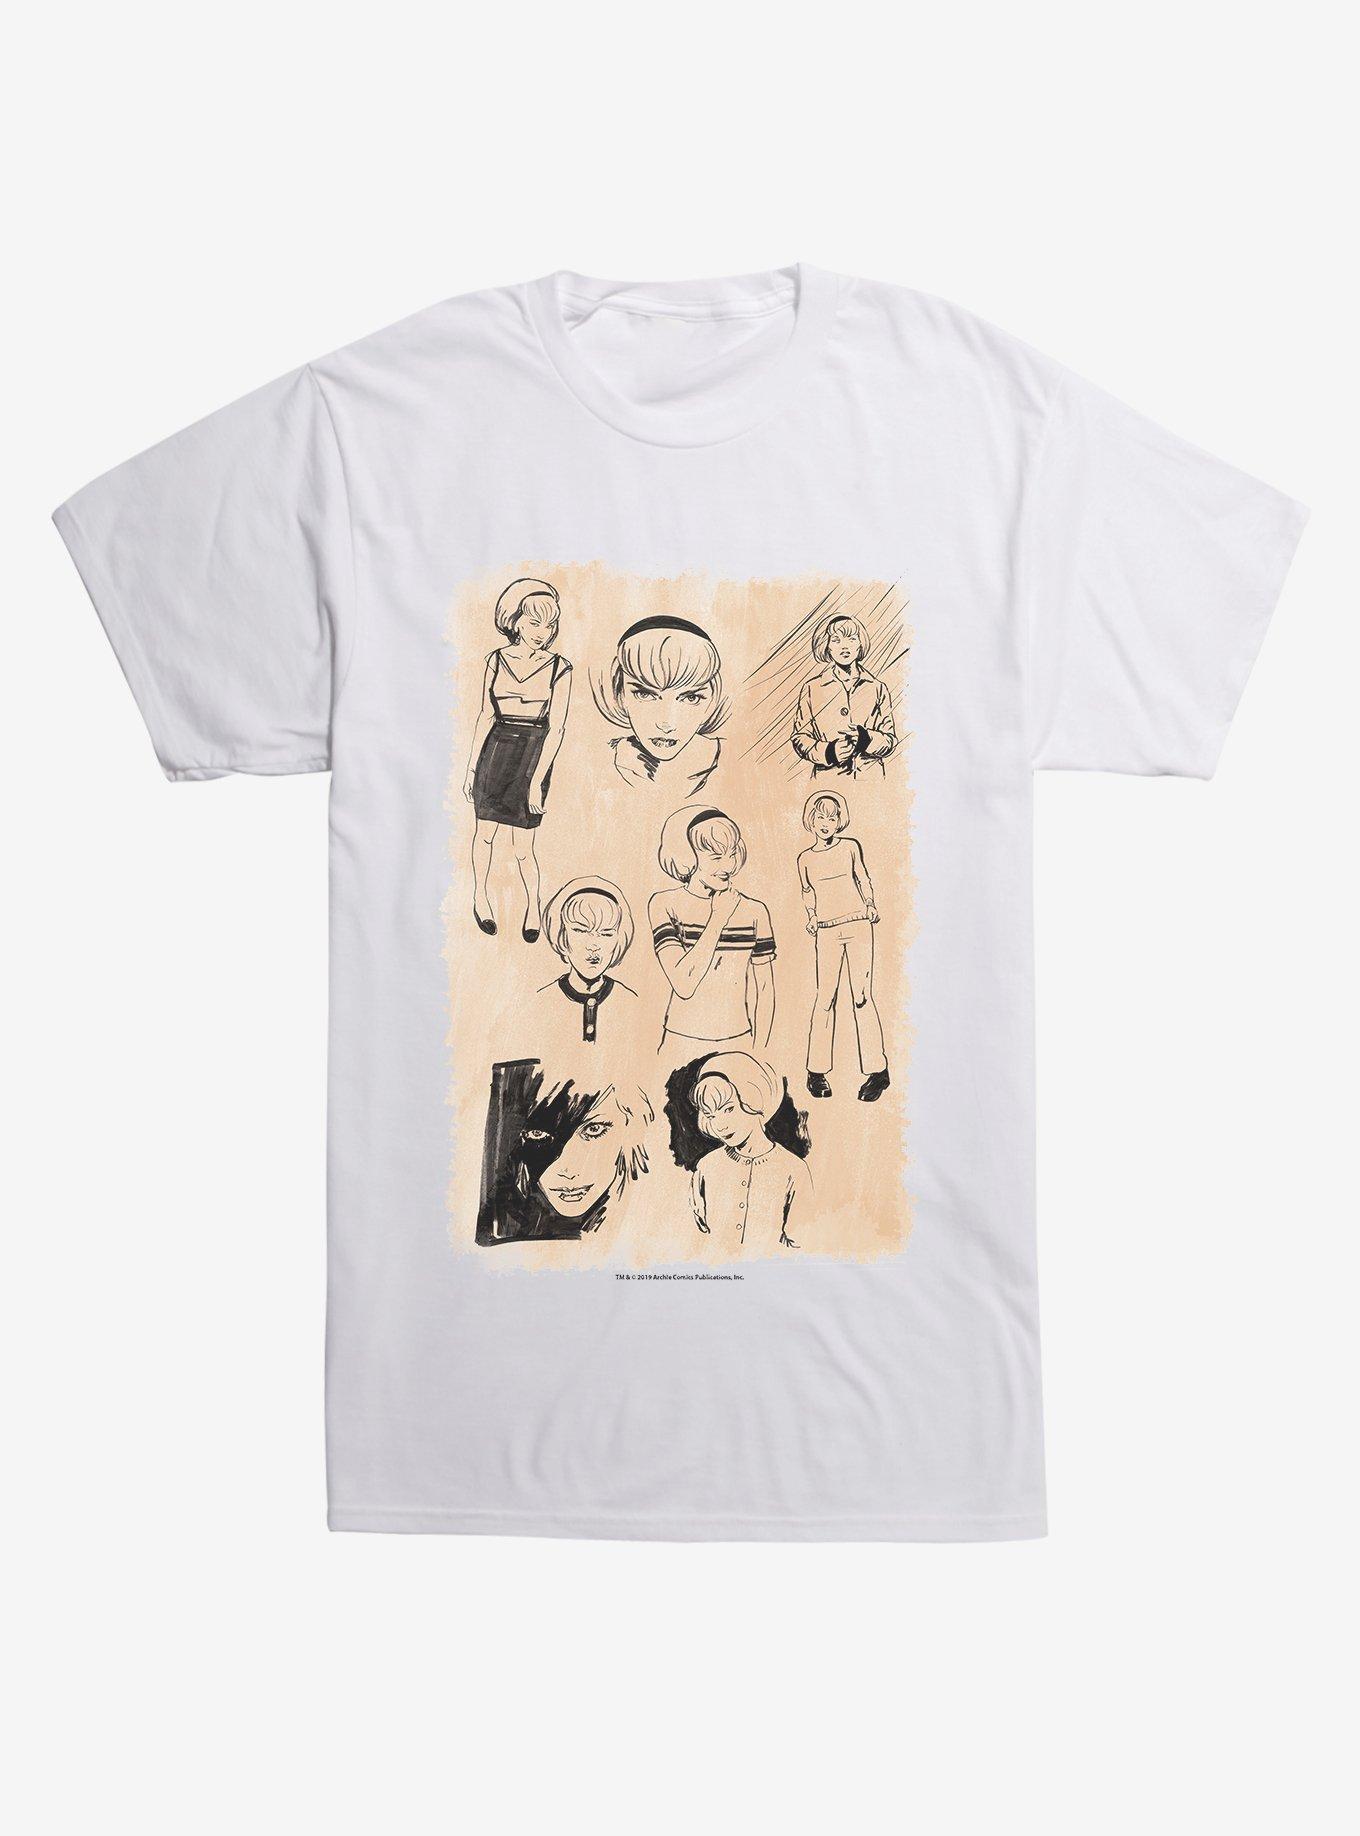 Black Chilling Adventures of Sabrina Sketches T-Shirt | BoxLunch | BoxLunch